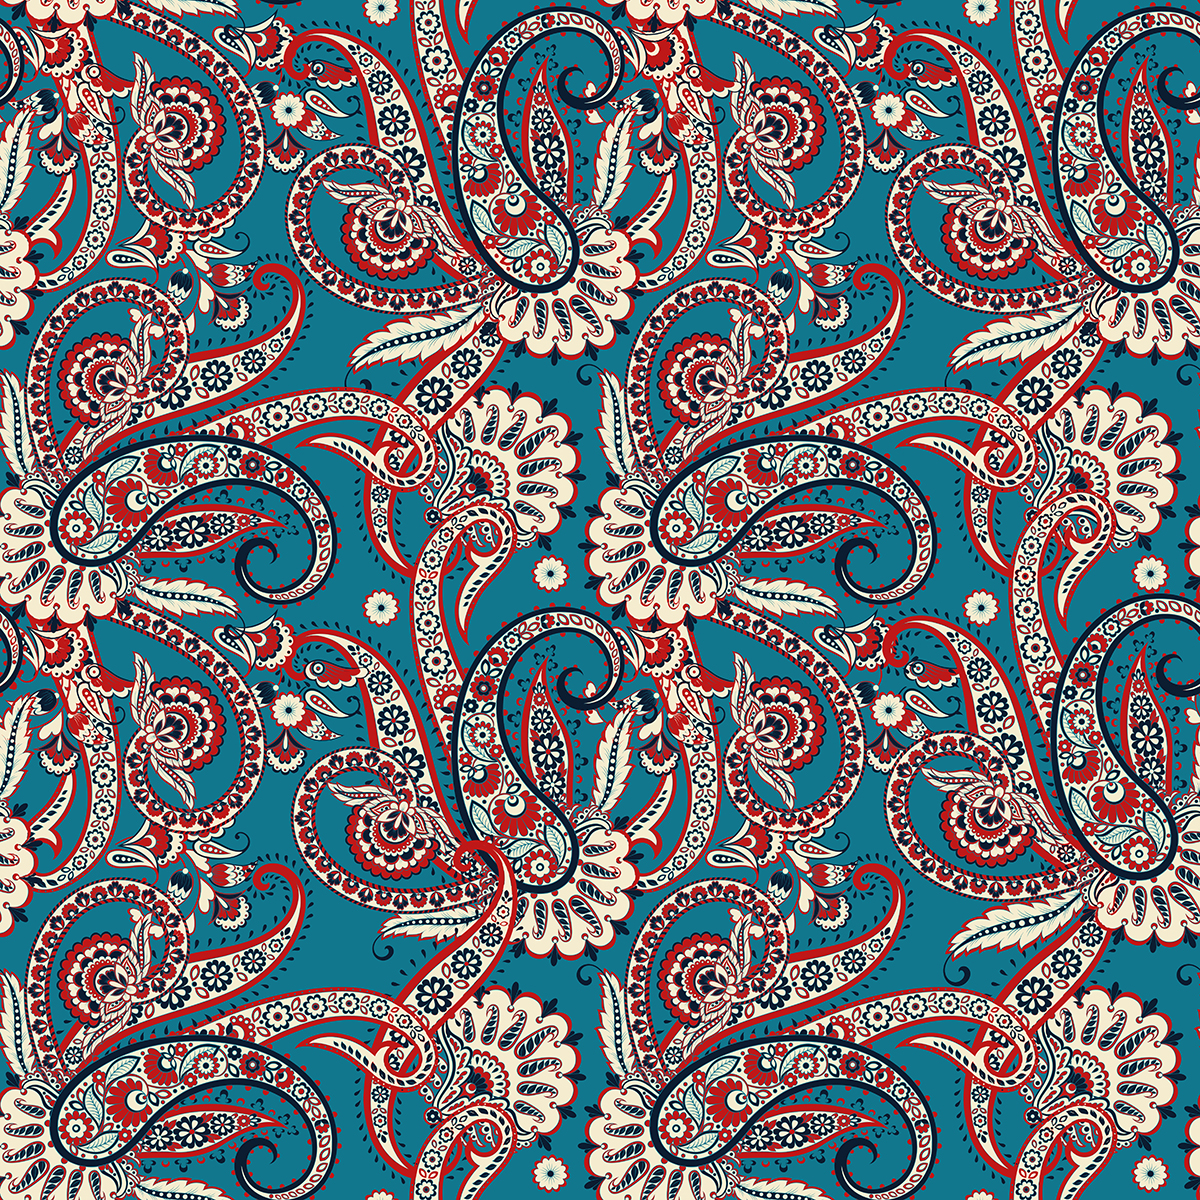 A pattern of paisley on a blue background